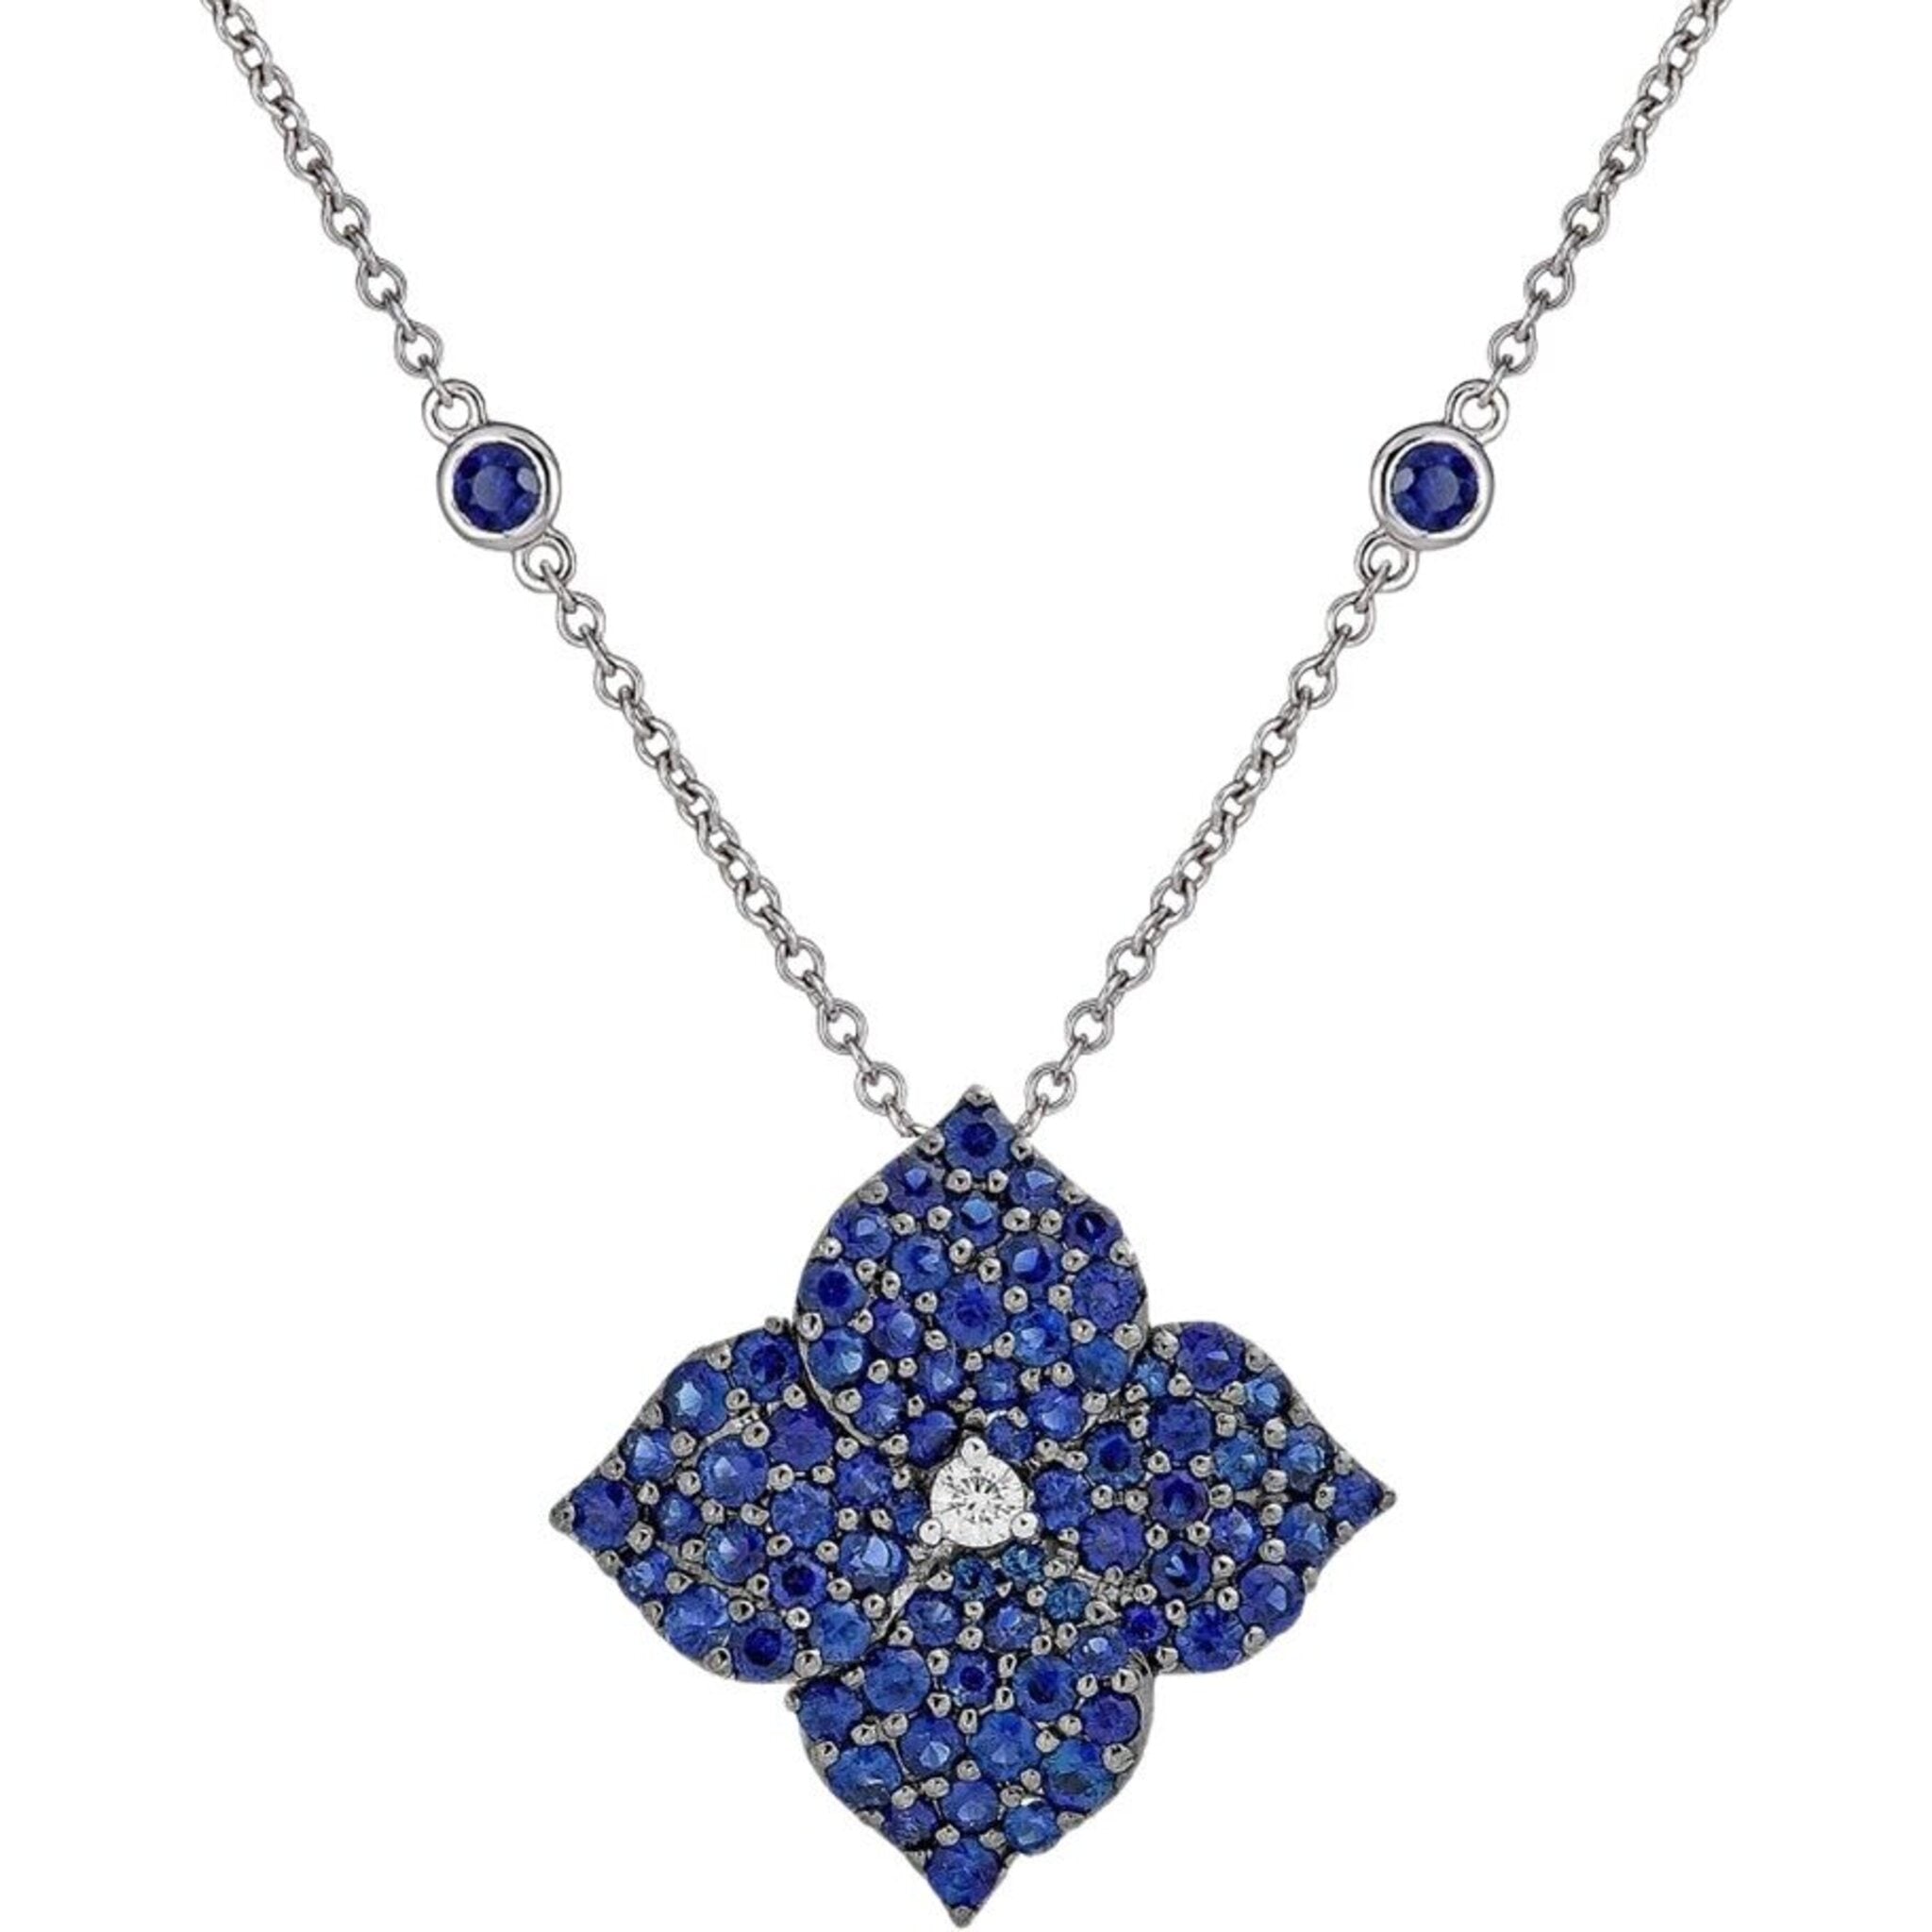 Piranesi - Mosaique Large Flower Necklace in Blue Sapphire - 18K White Gold